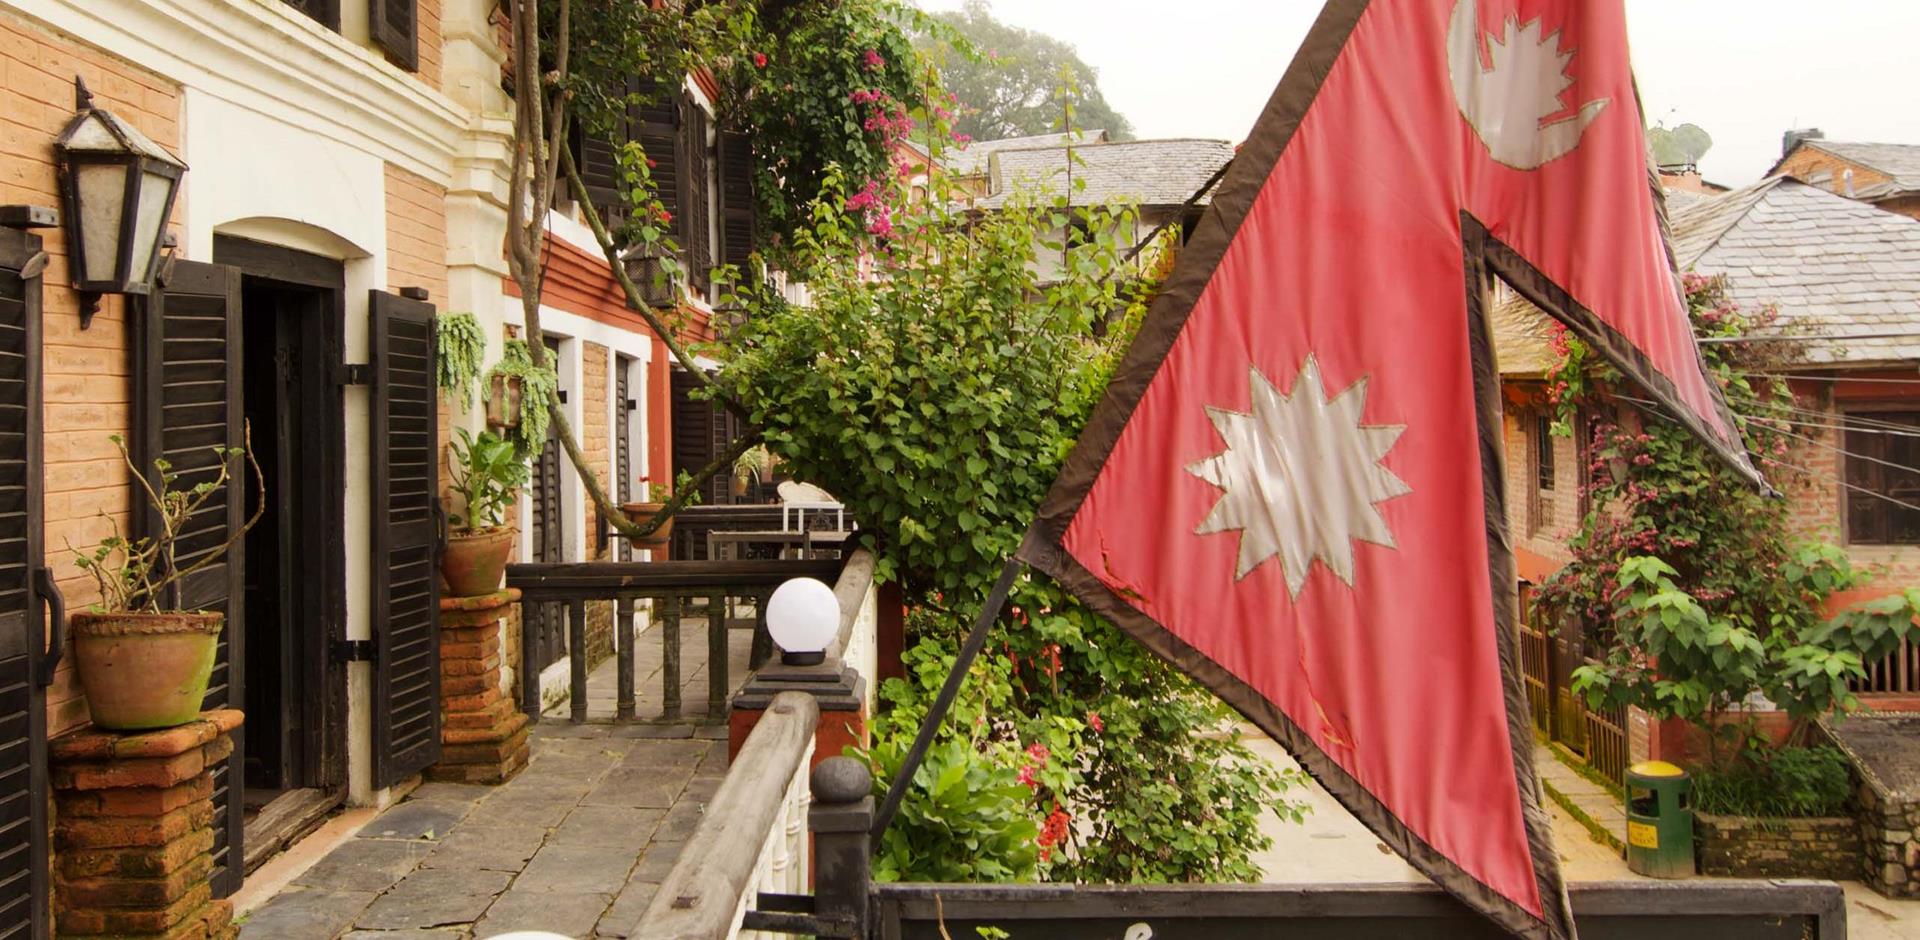 Exterior view of balcony and Nepalese national flag, Old Inn Bandipur, Nepal